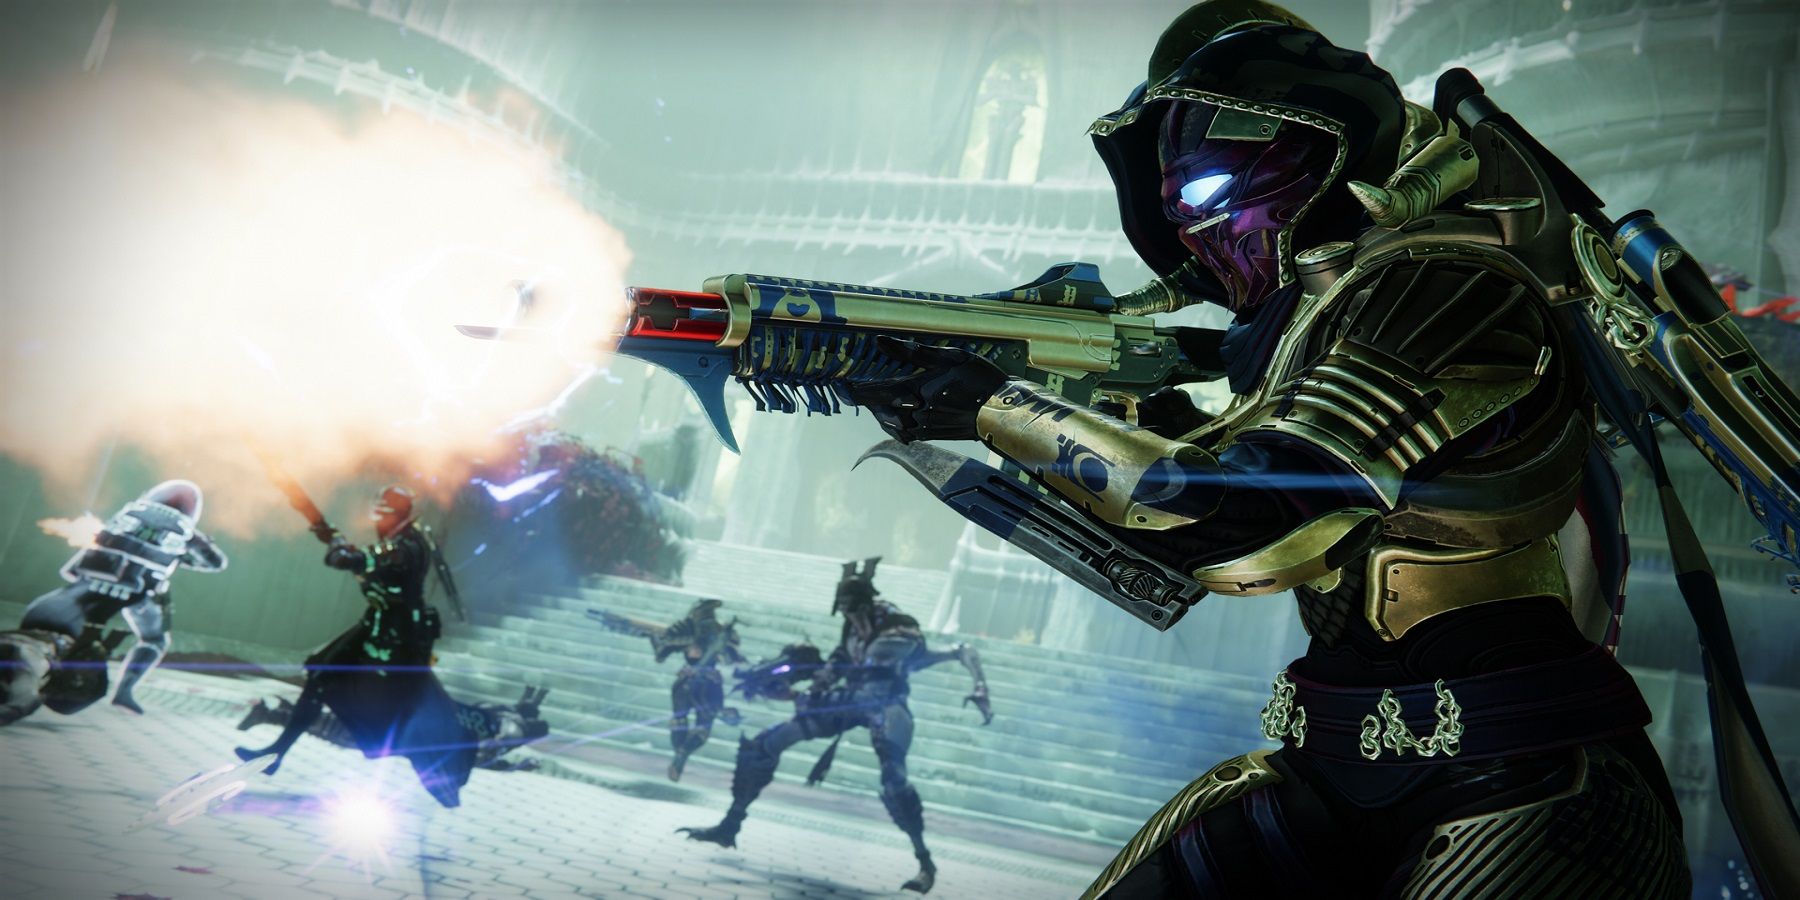 Bungie gave players a first taste of the rewards, Light-level, and release date for the new dungeon.